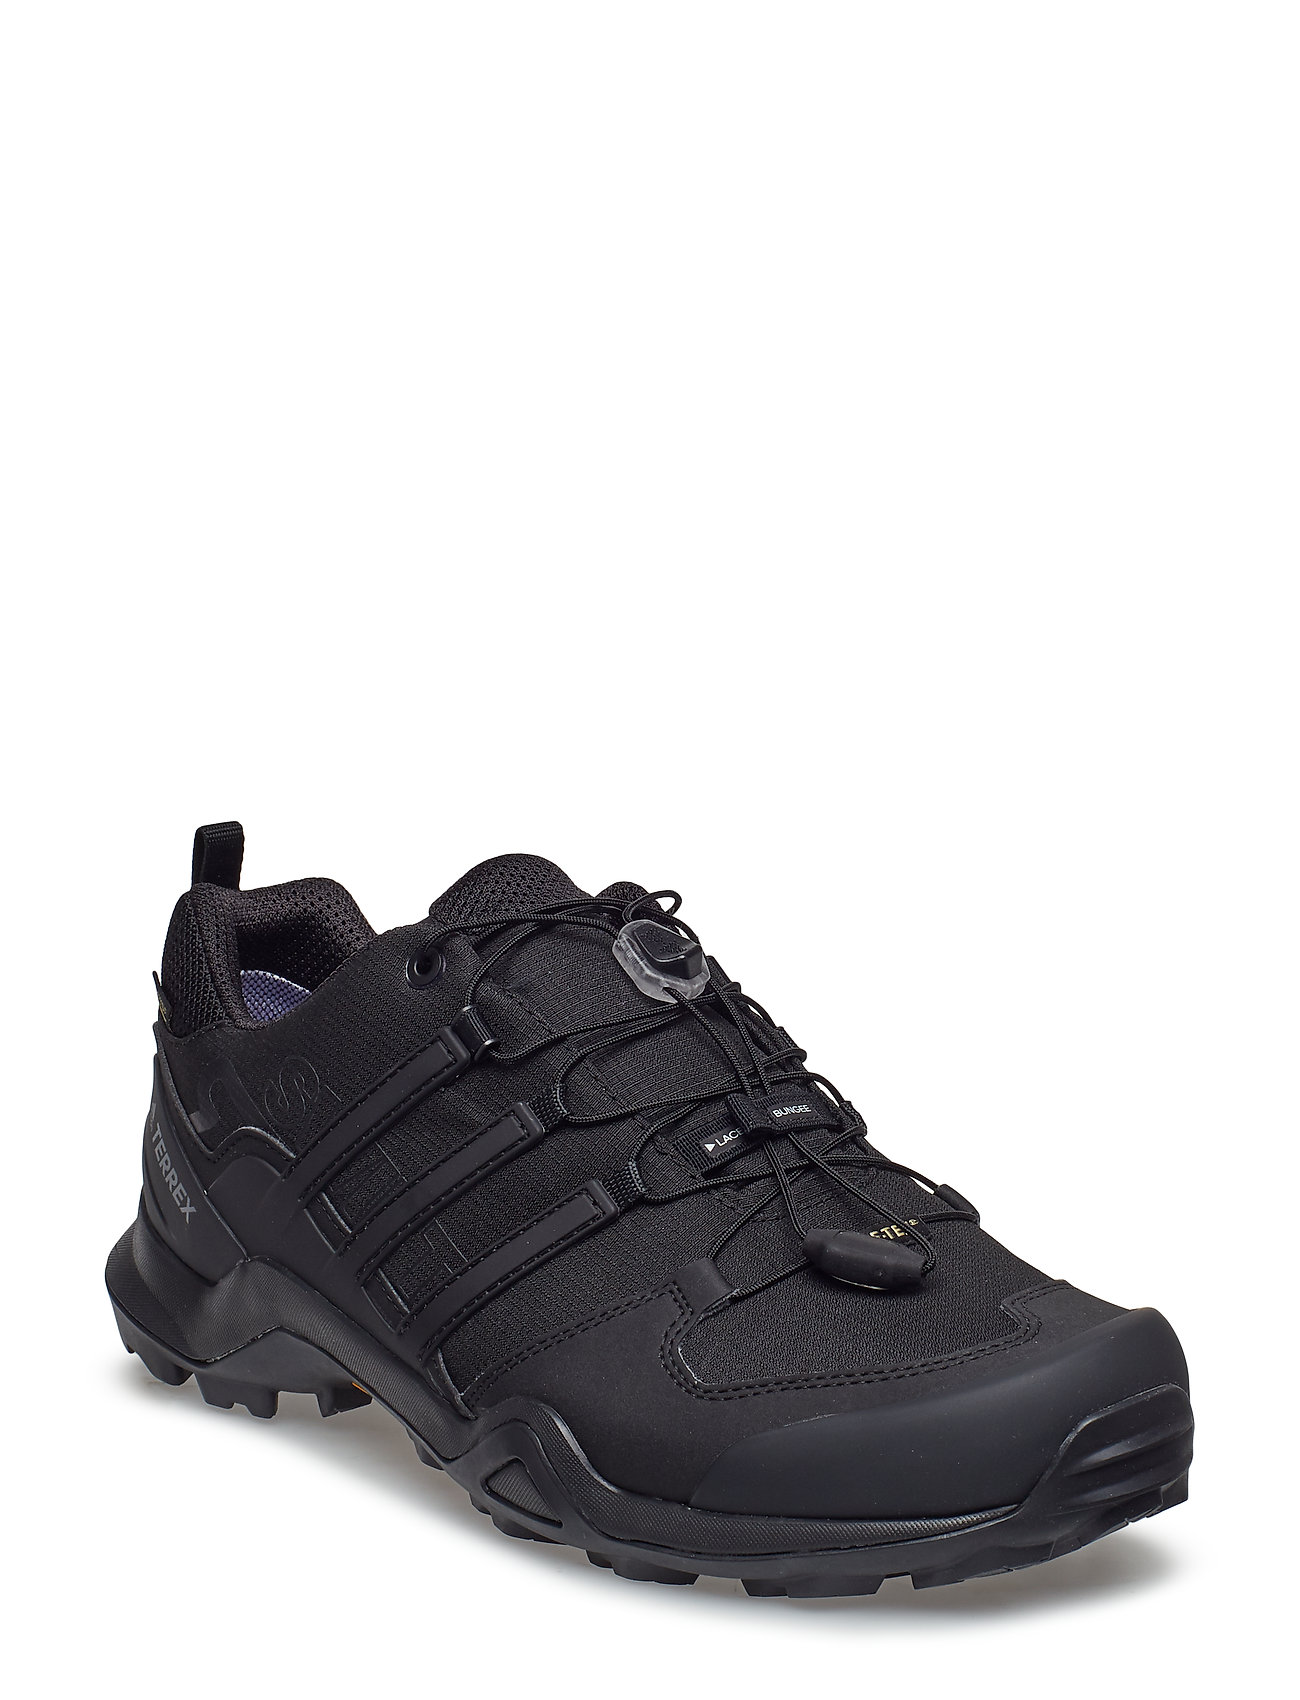 Terrex Swift R2 Gore-Tex Hiking Shoes Sport Shoes Outdoor/hiking Shoes Musta Adidas Performance, adidas Performance